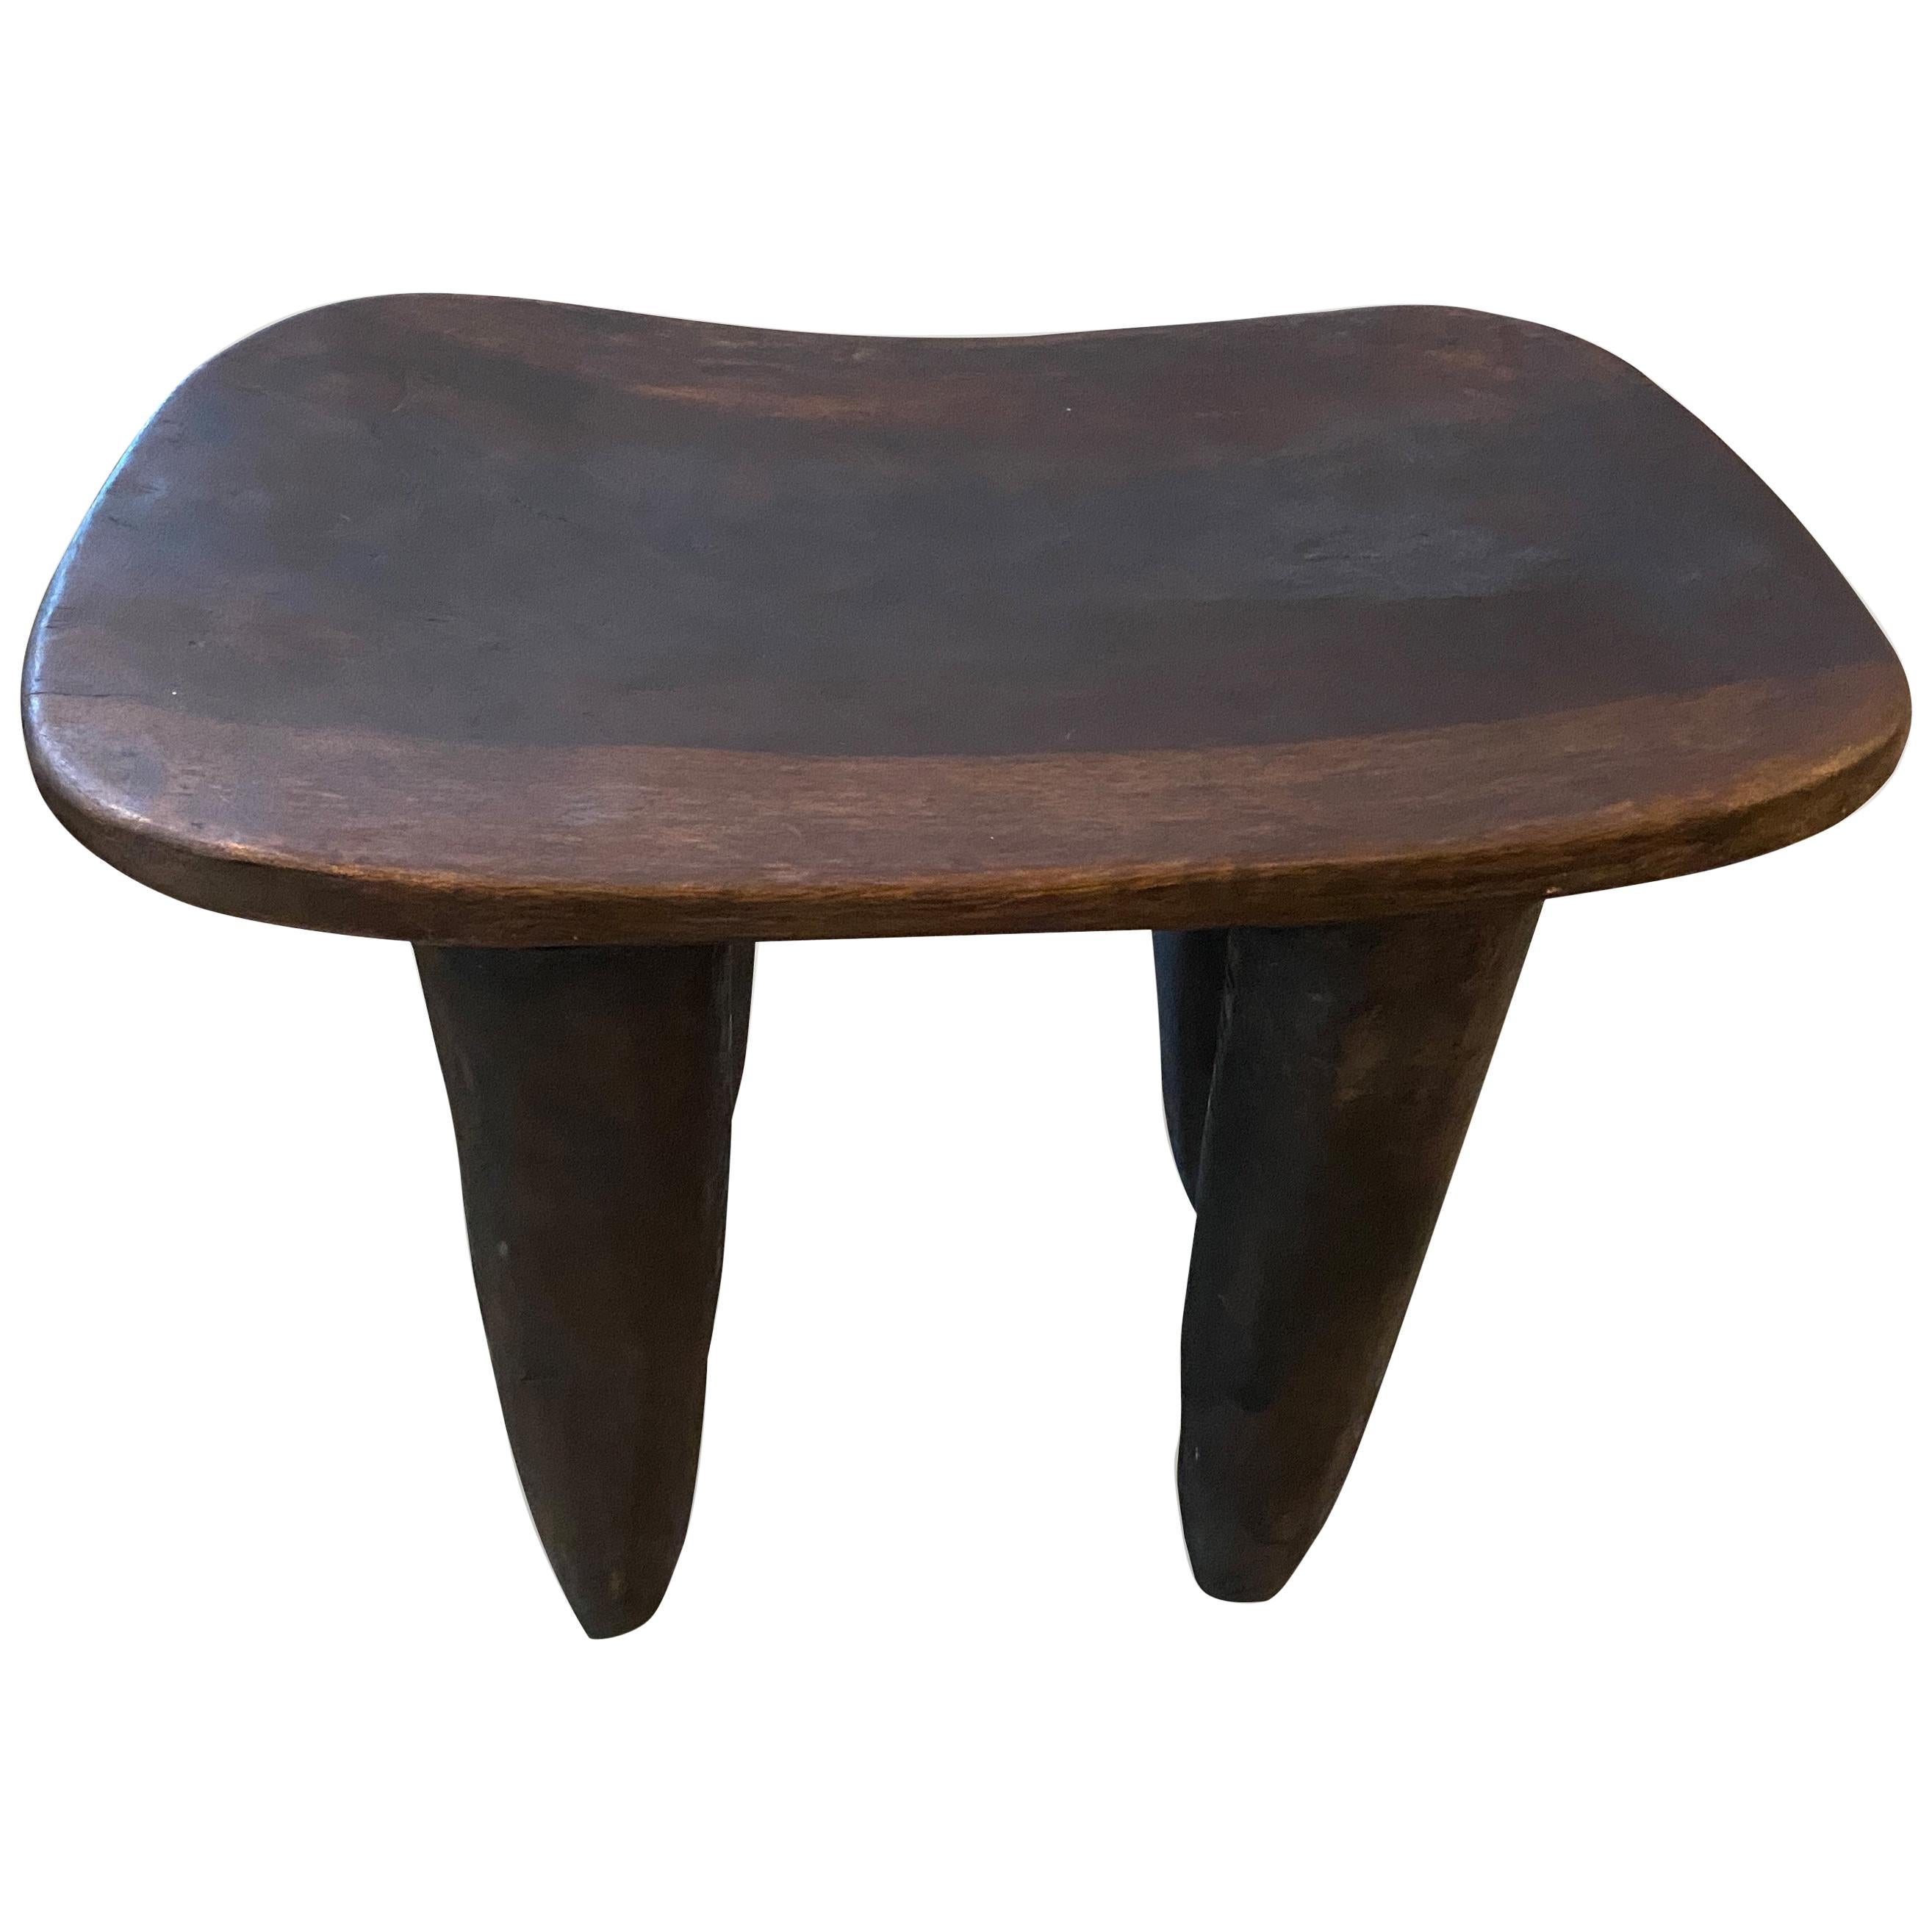 Andrianna Shamaris Senufo Stool or Bench from Cote d'Ivoire